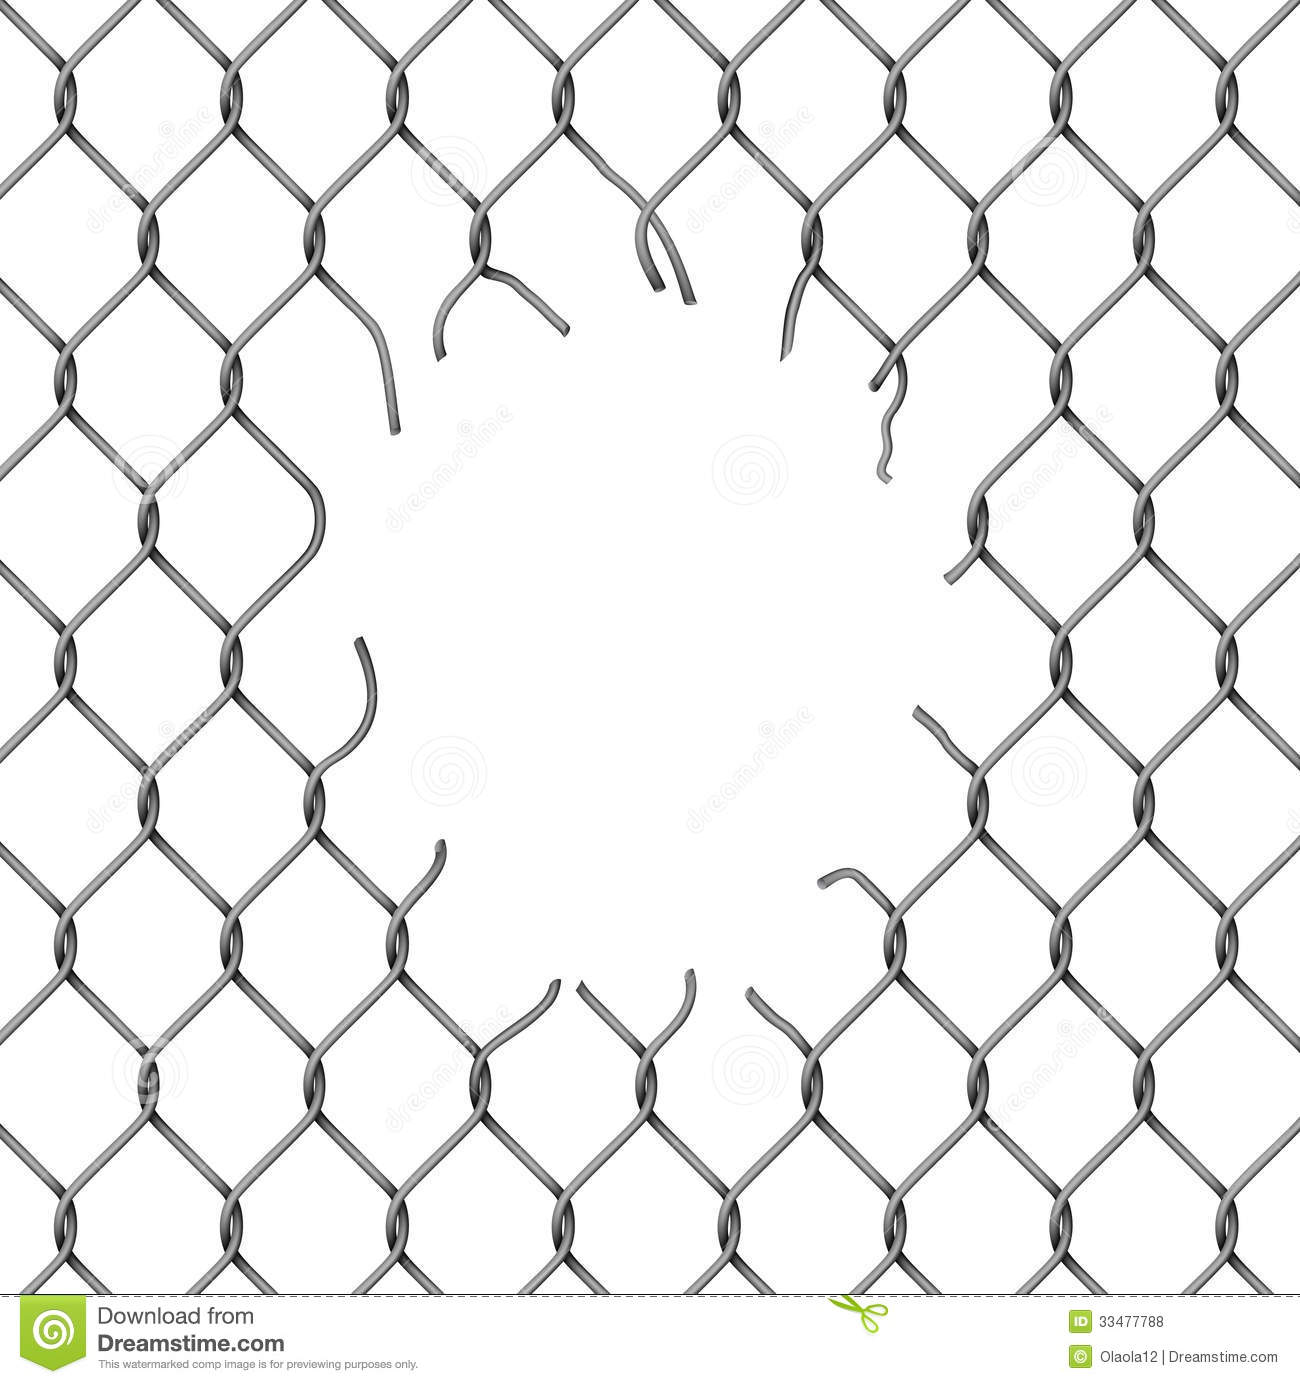 Chain Link Fence Vector